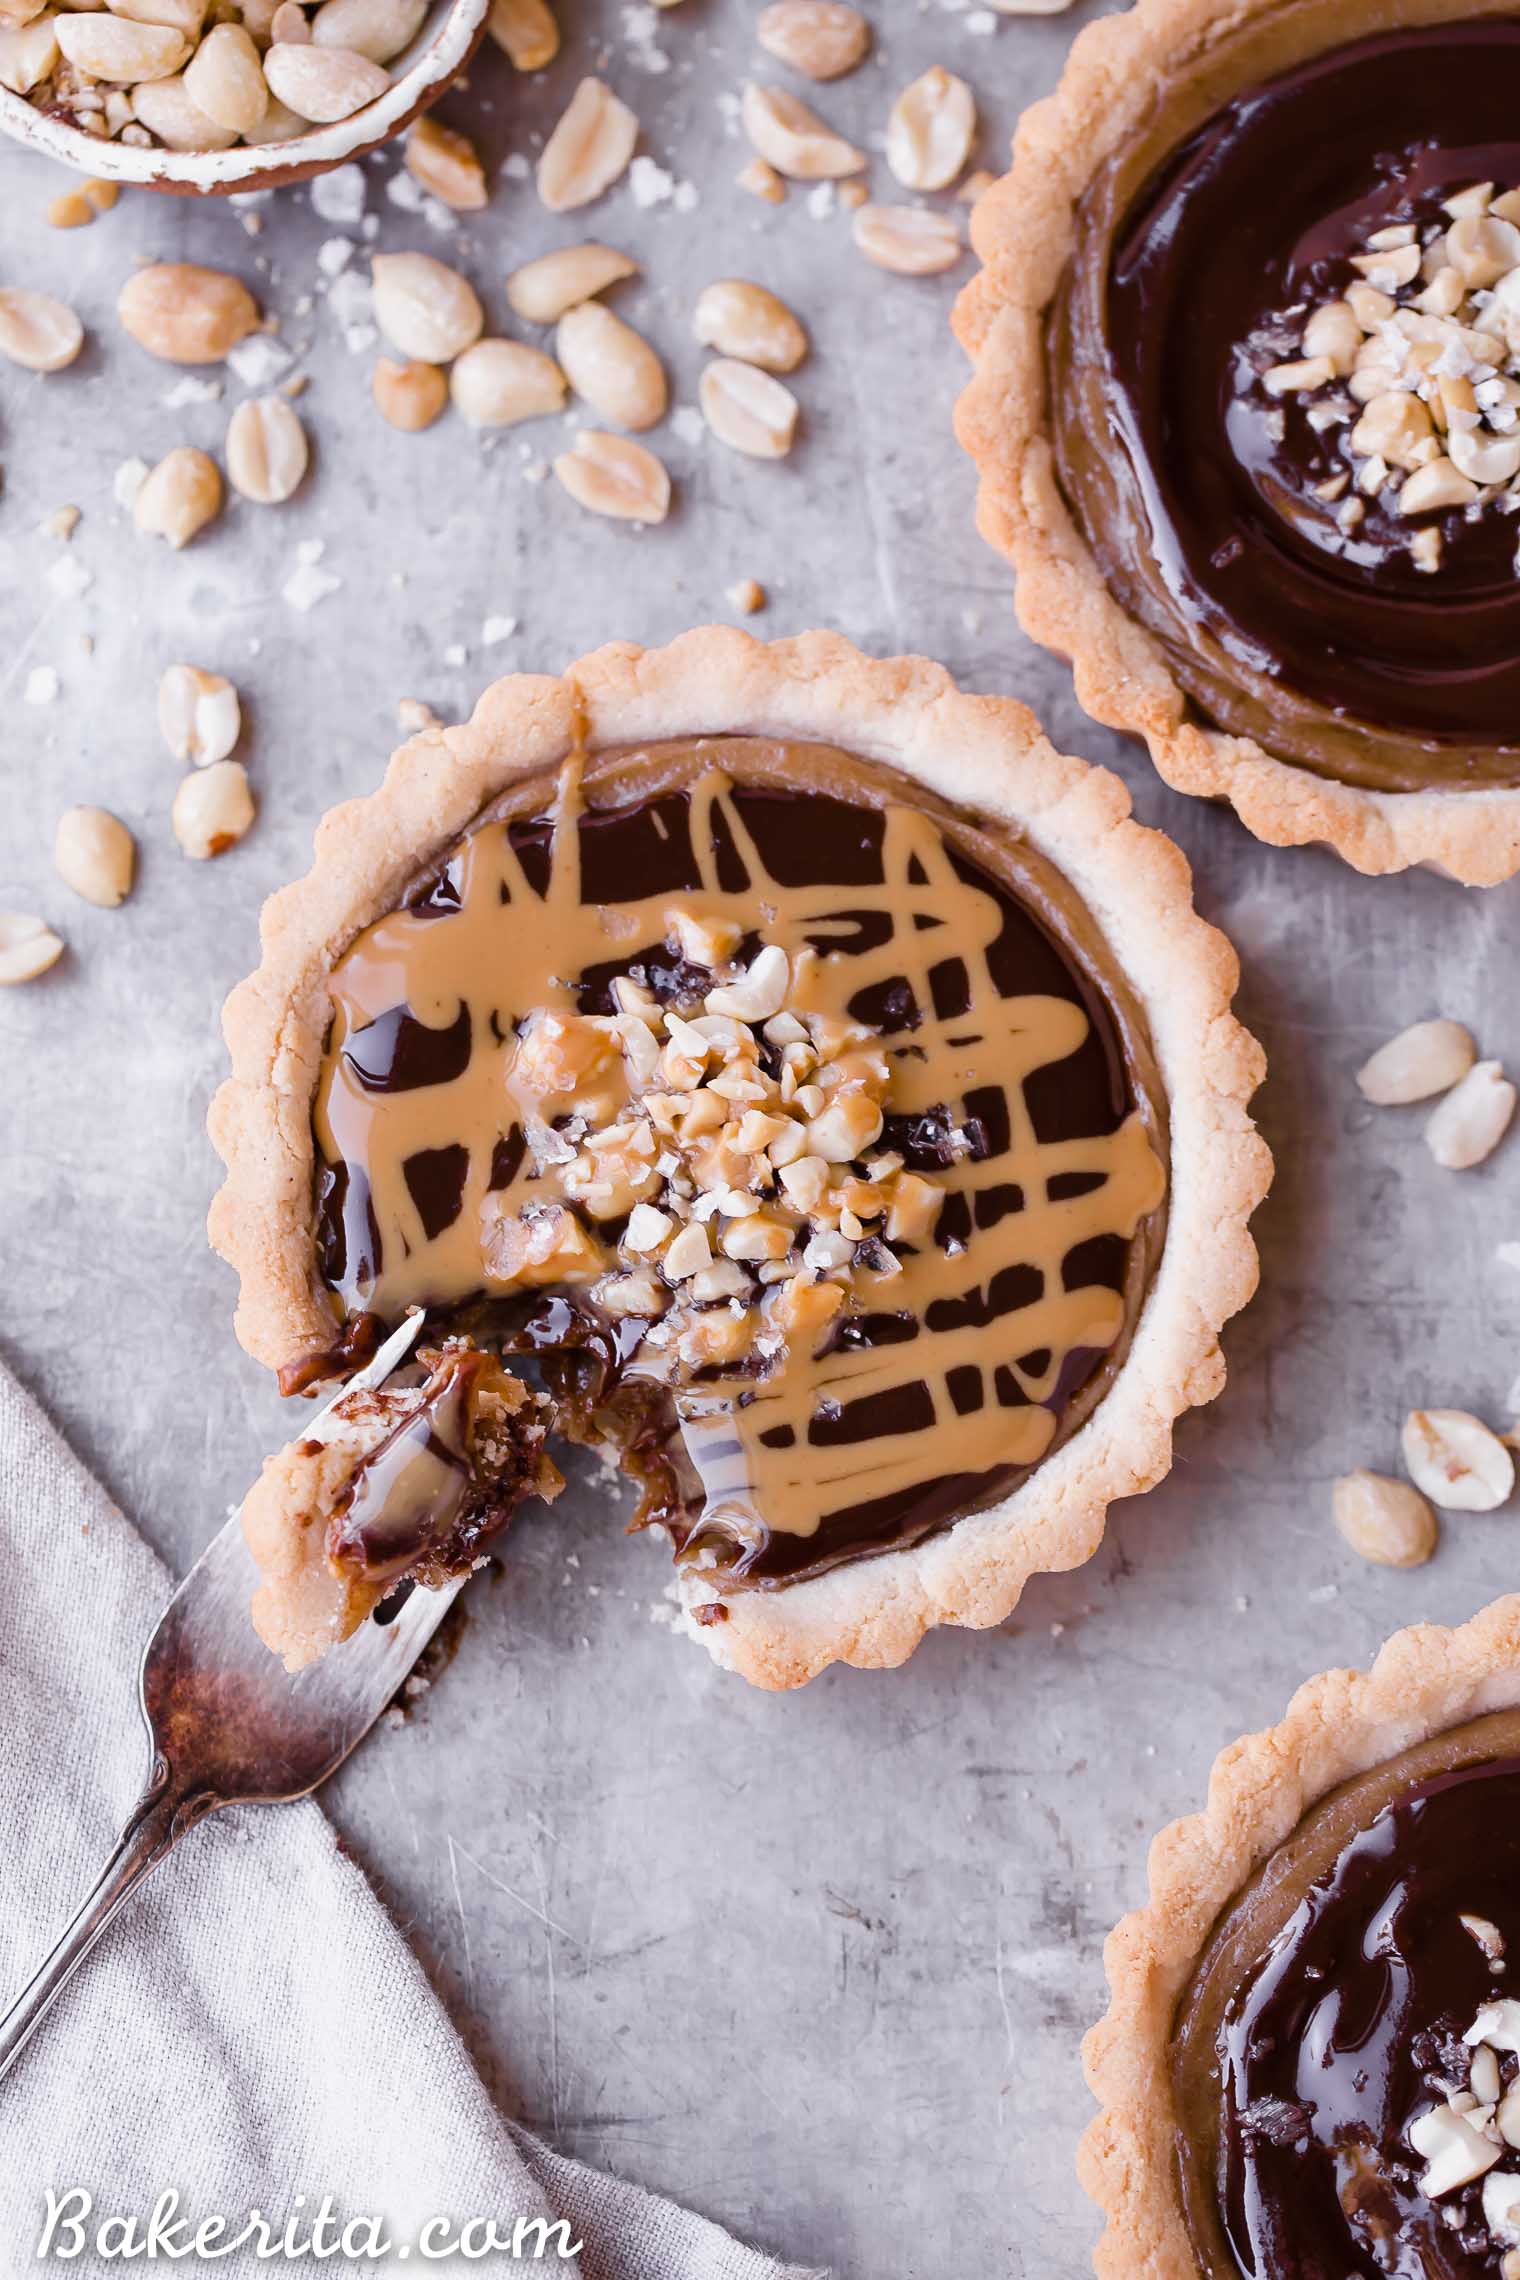 These Chocolate Peanut Butter Caramel Tarts have a crunchy shortbread crust that's filled with a creamy peanut butter date caramel and topped with creamy chocolate ganache! This decadent tart recipe is gluten-free, grain-free and vegan.